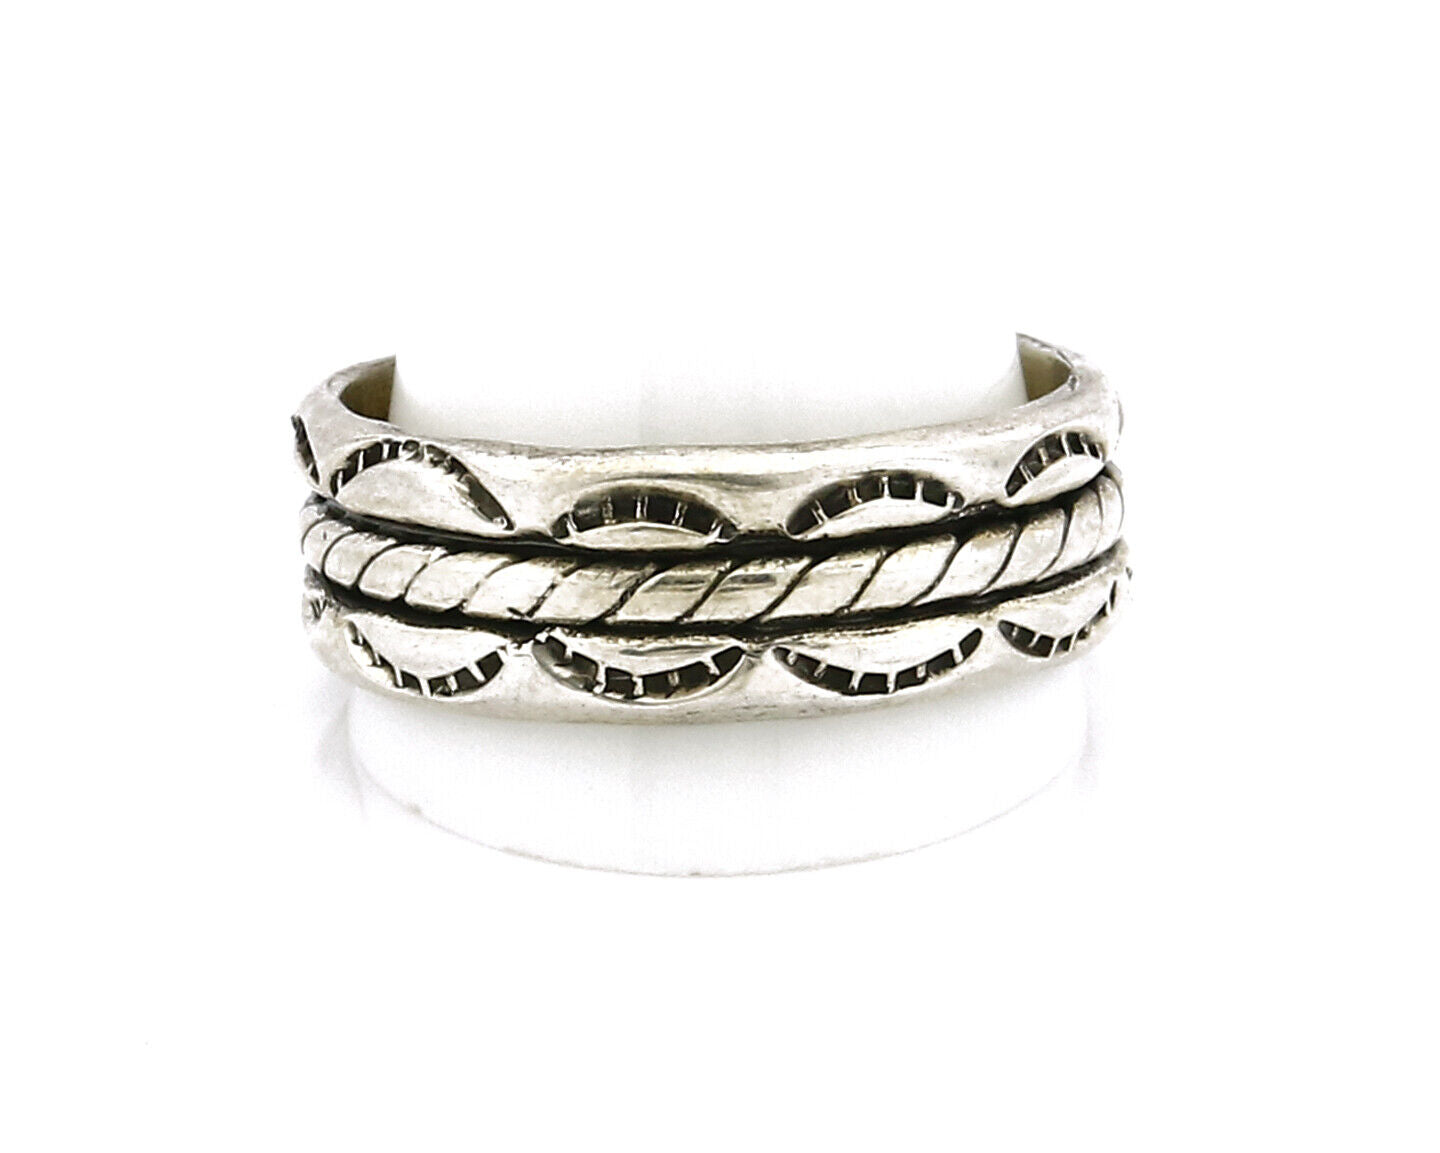 Navajo Ring .925 Silver Handmade Hand Stamped 3 Row Rope Band C.1980s Size 14.25